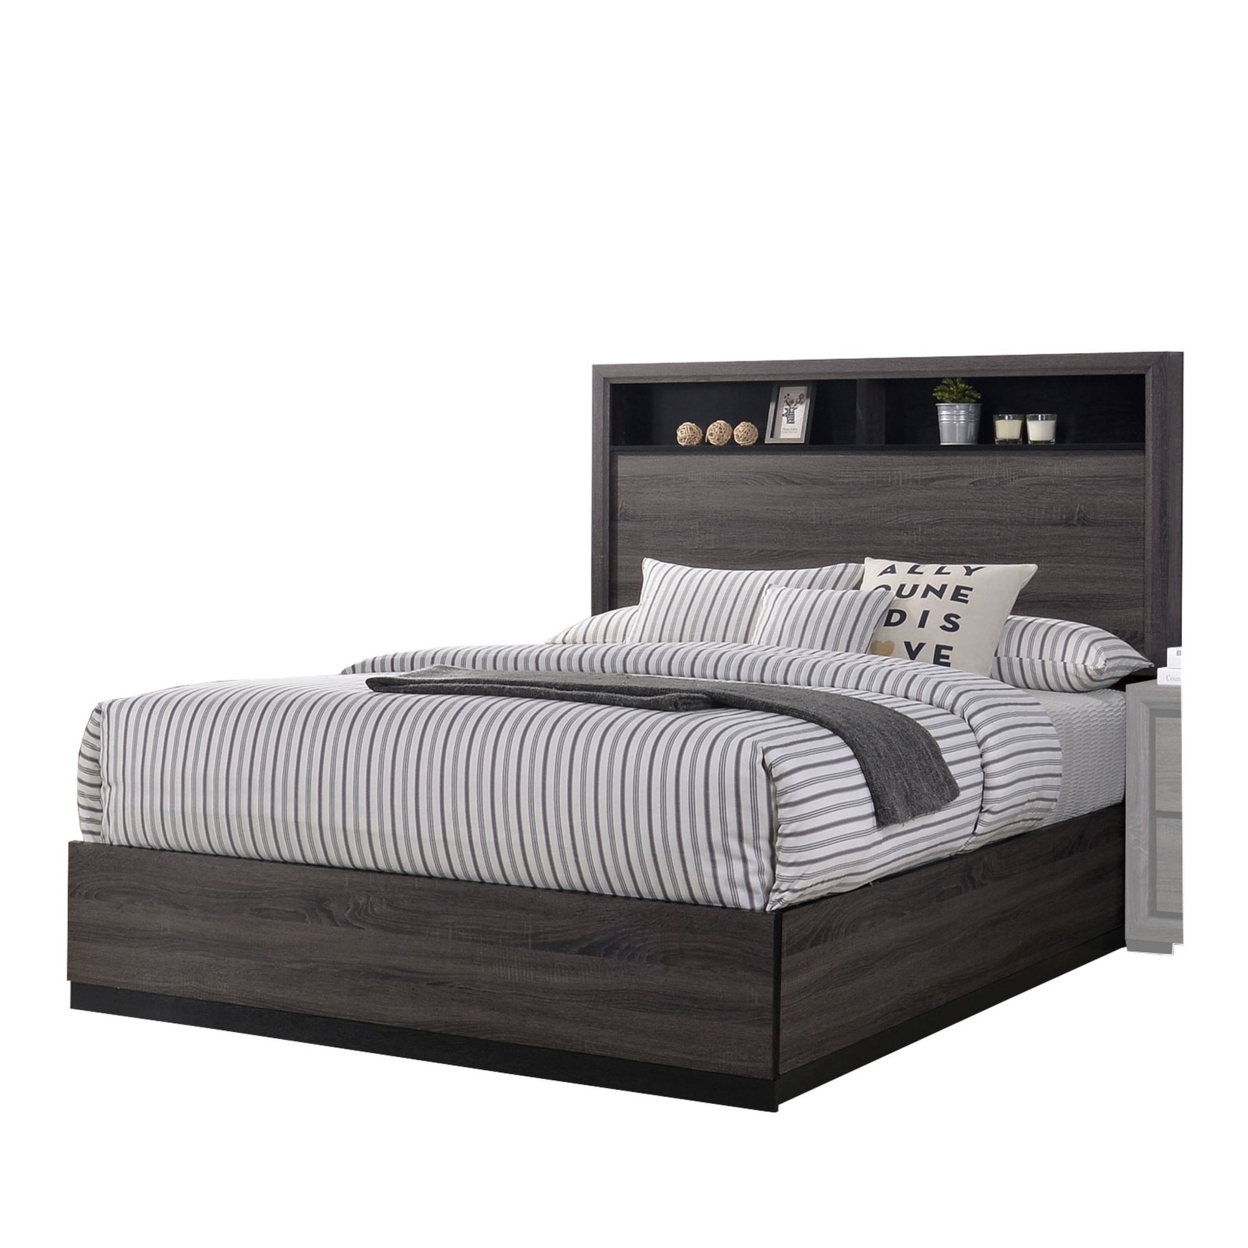 Transitional Wooden Queen Size Platform Bed With Bookcase Headboard, Gray- Saltoro Sherpi